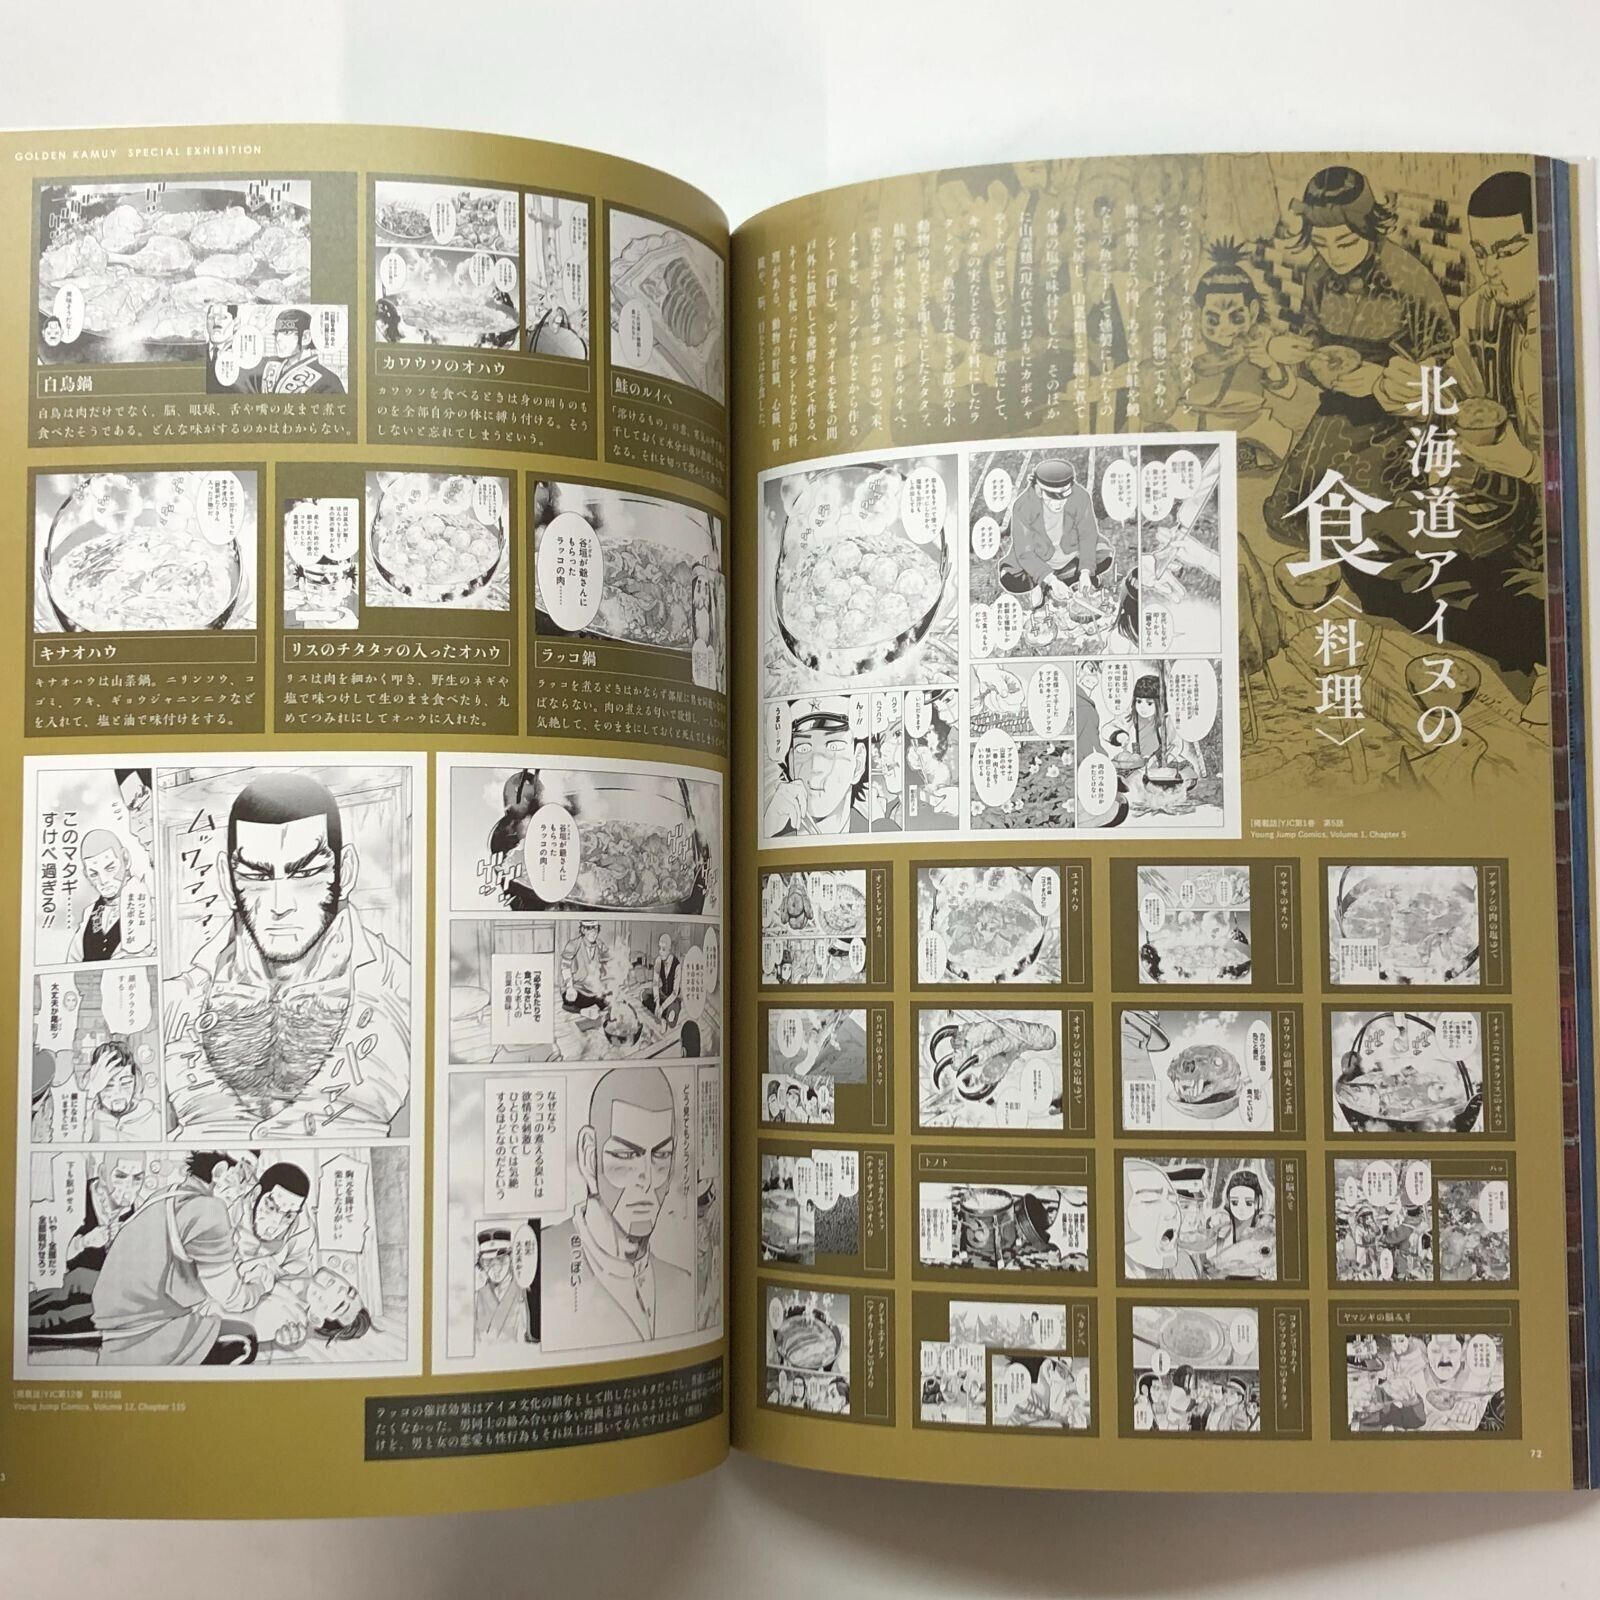 Golden Kamuy Special Exhibition Art Book Illustration Used